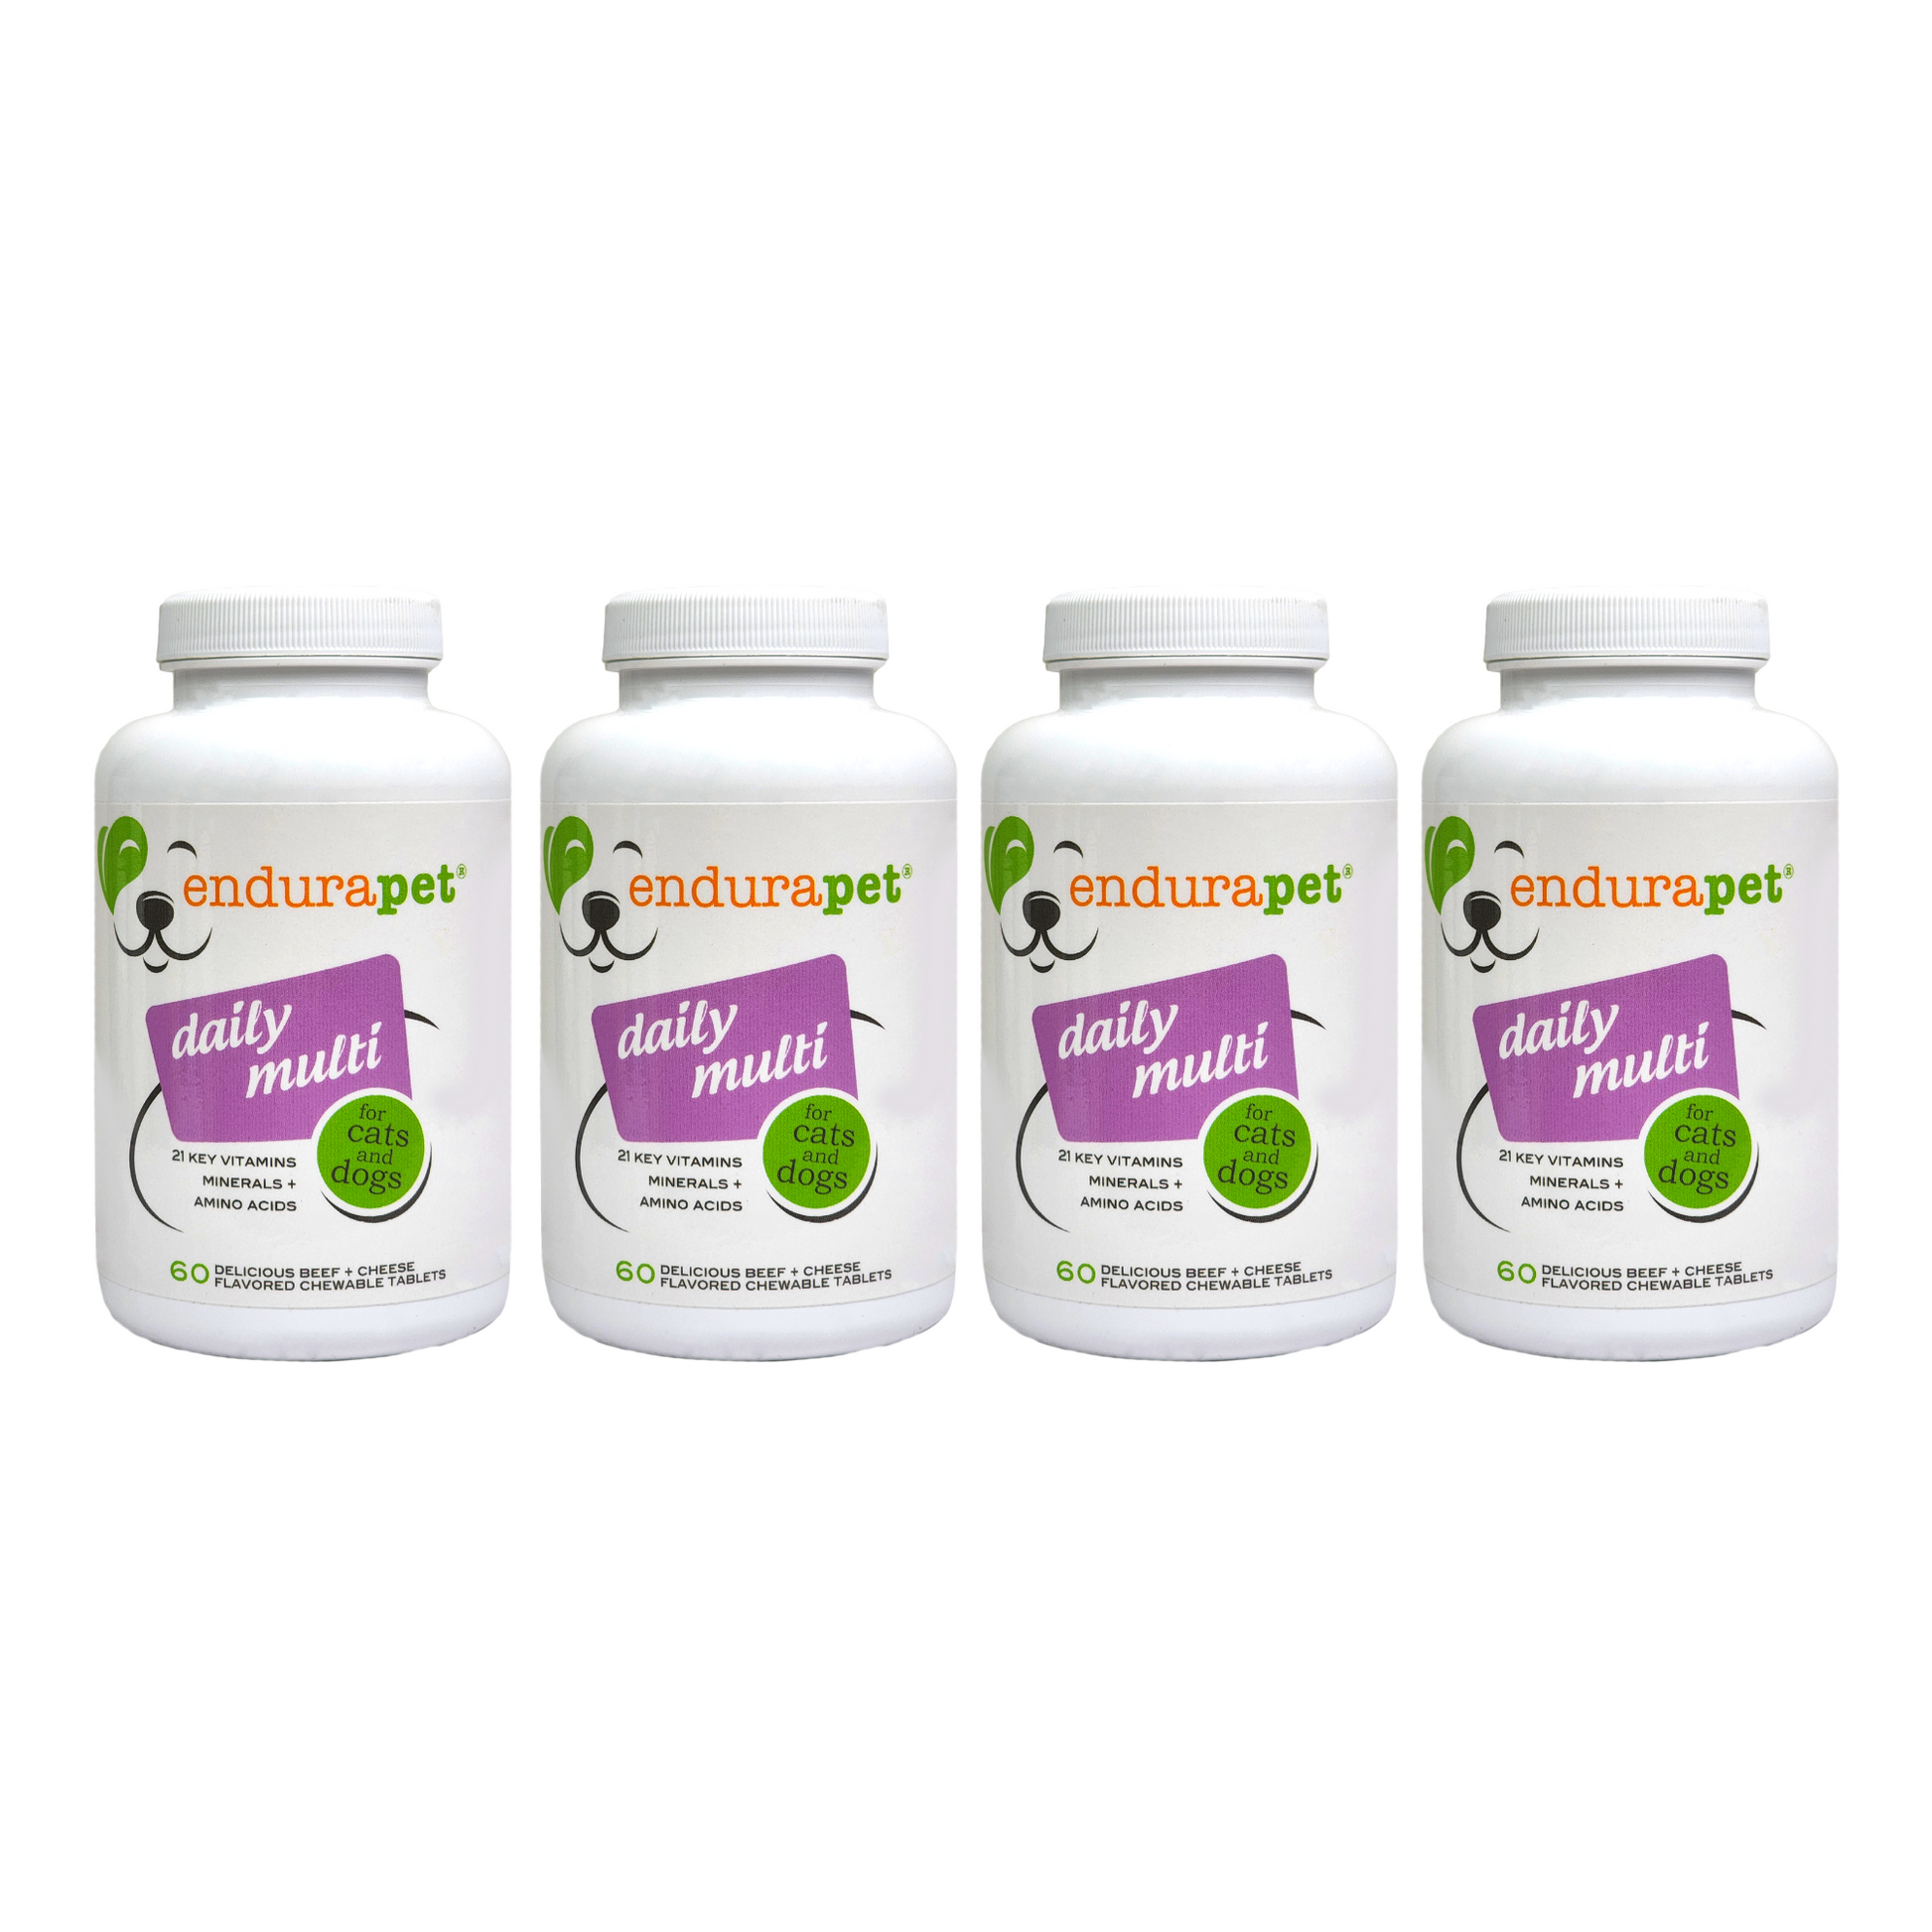 endurapet® Daily Multi (4) pack Multi-Vitamins for Cats and Dogs